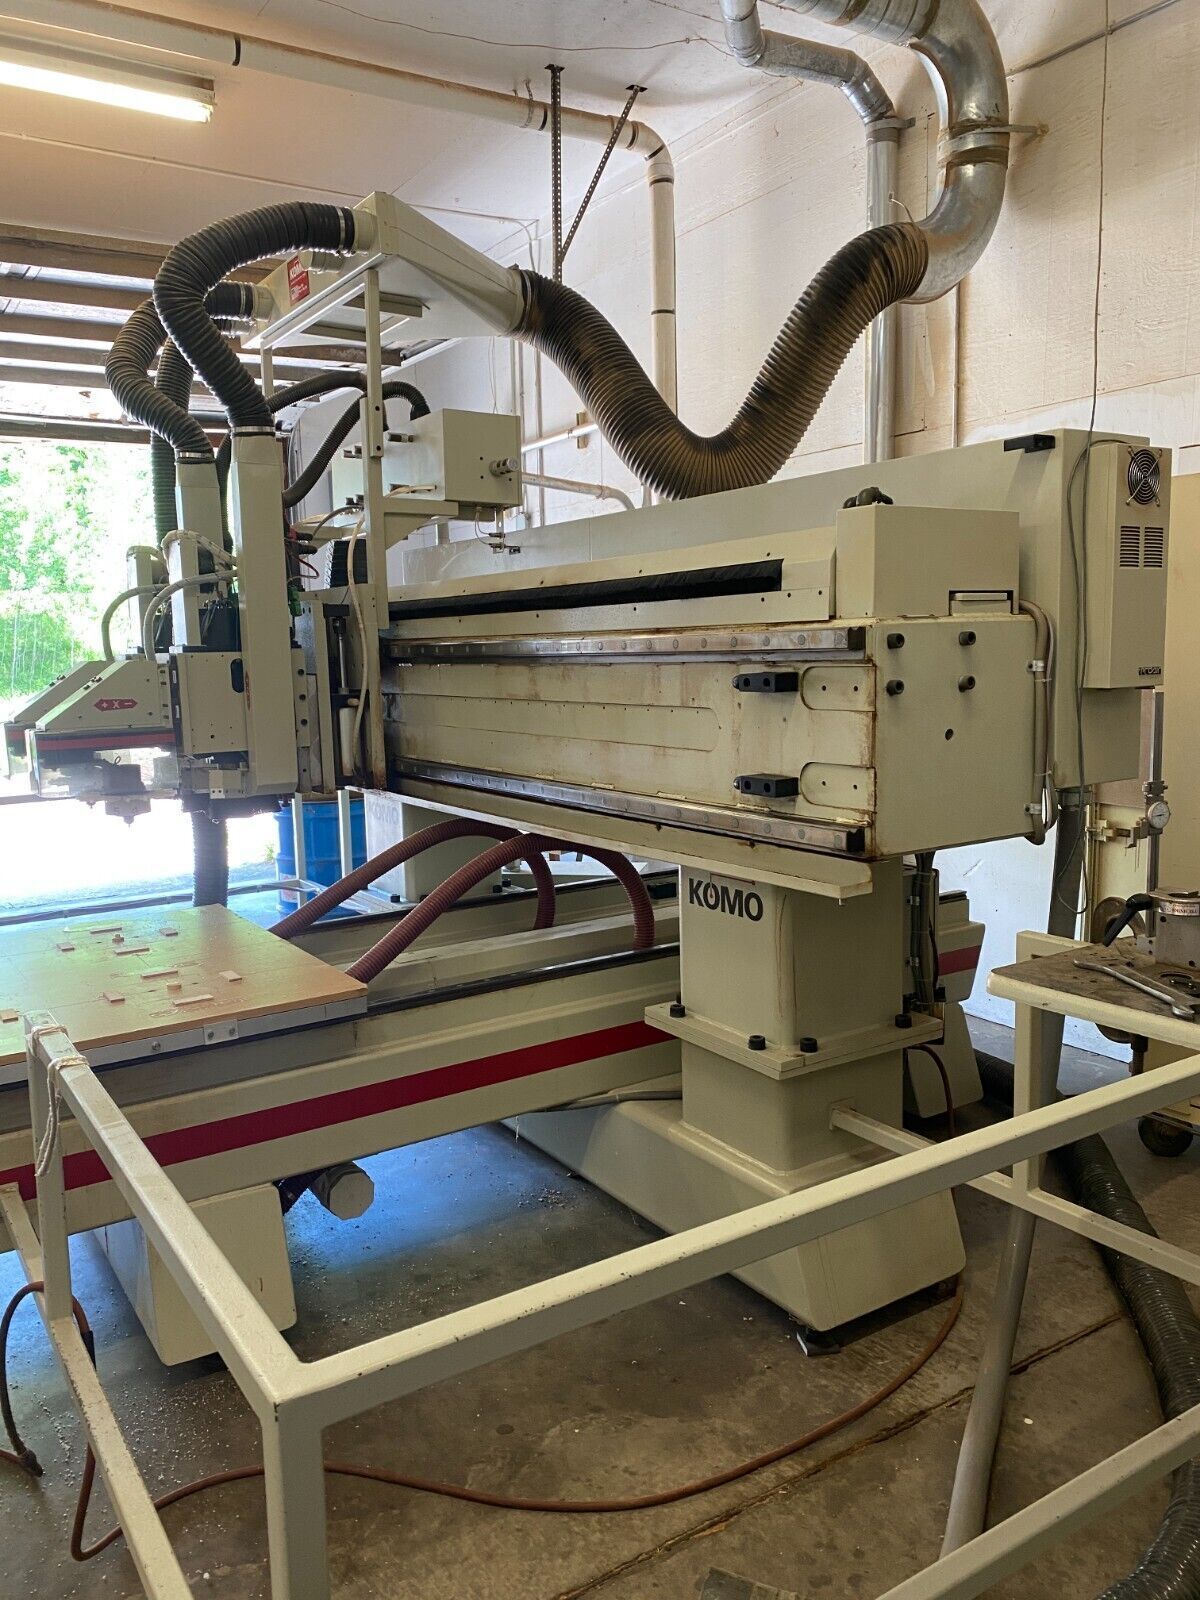 1999 KOMO 408 Used 3 Axis CNC Routers | CNC Router Store